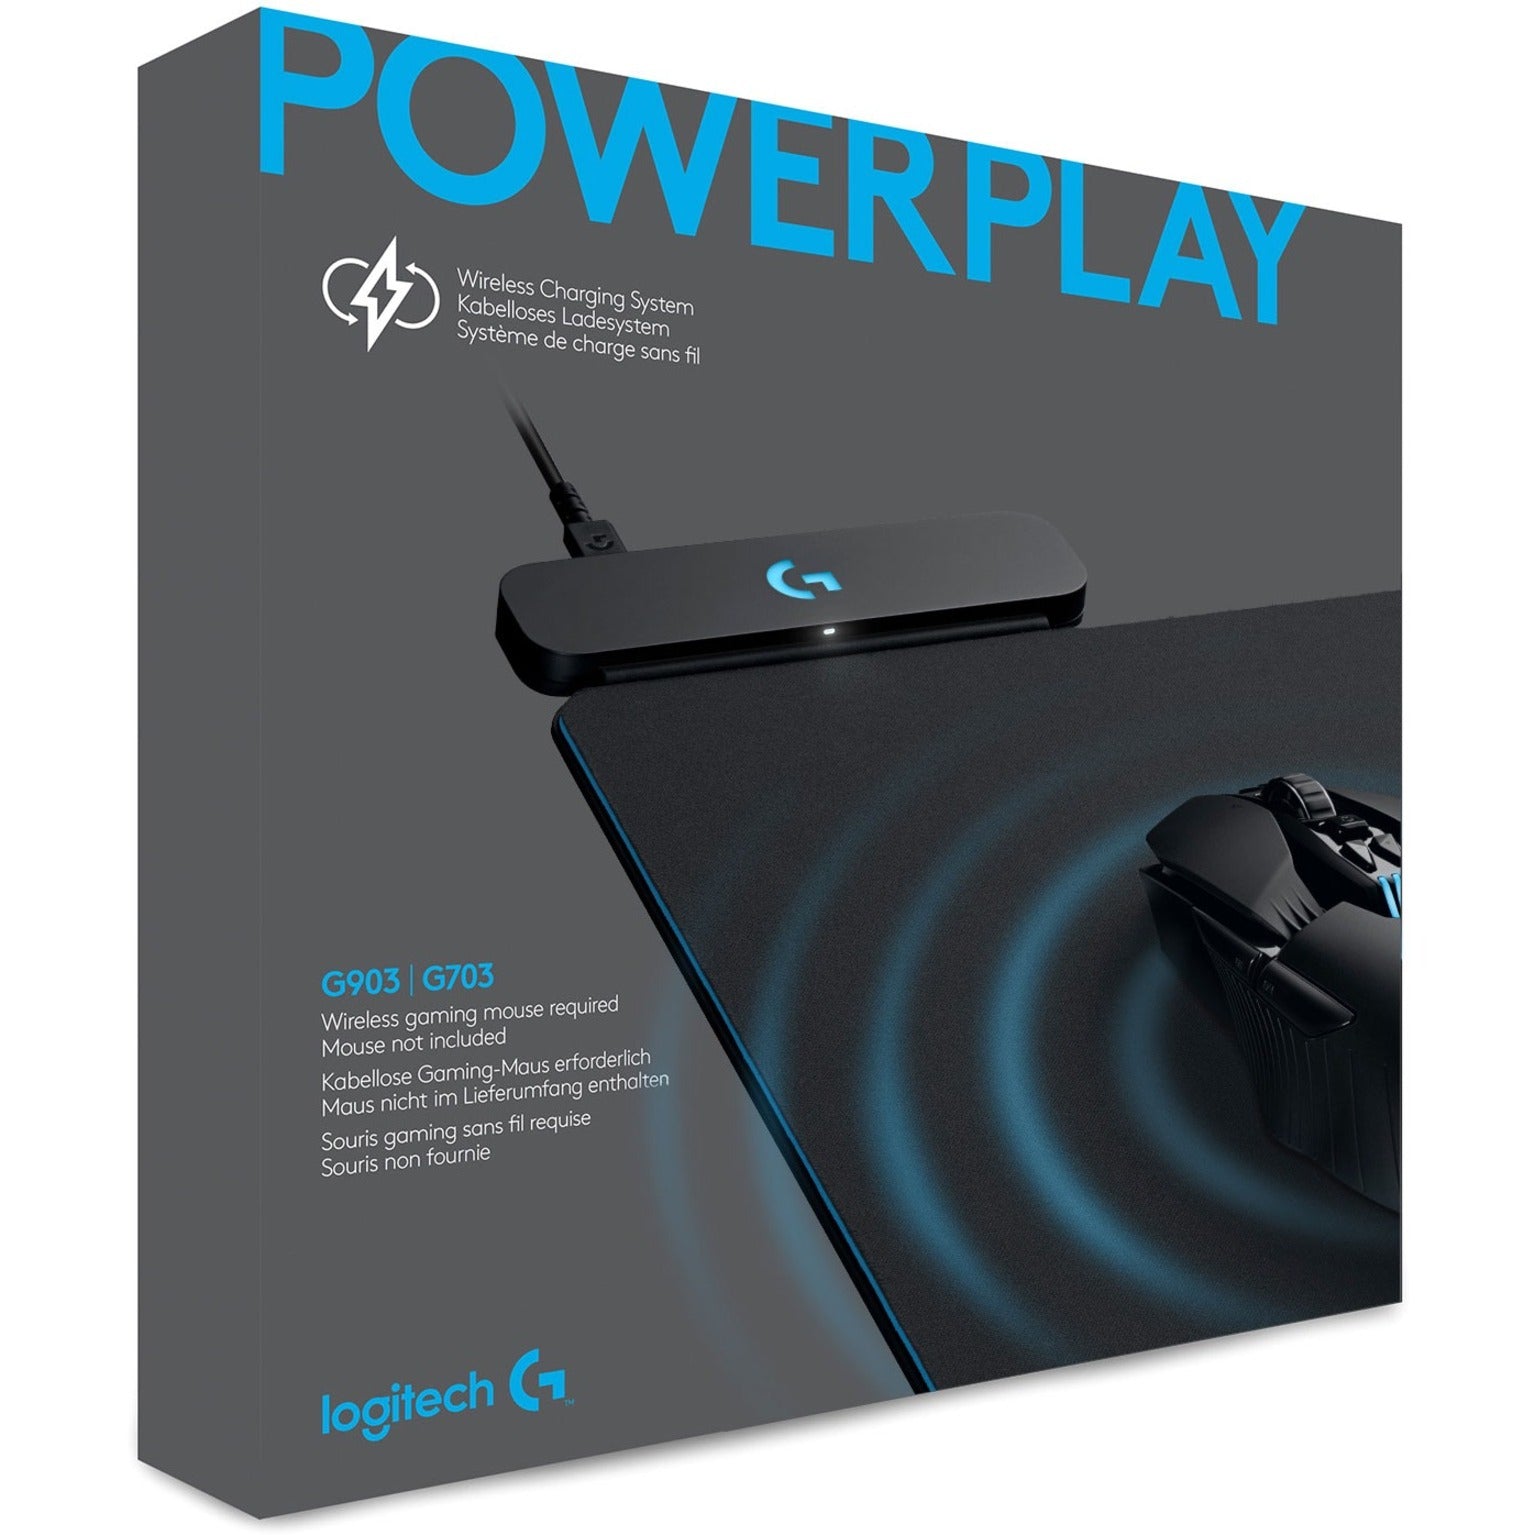 POWERPLAY Wireless Charging System for Select Logitech Gaming Mice